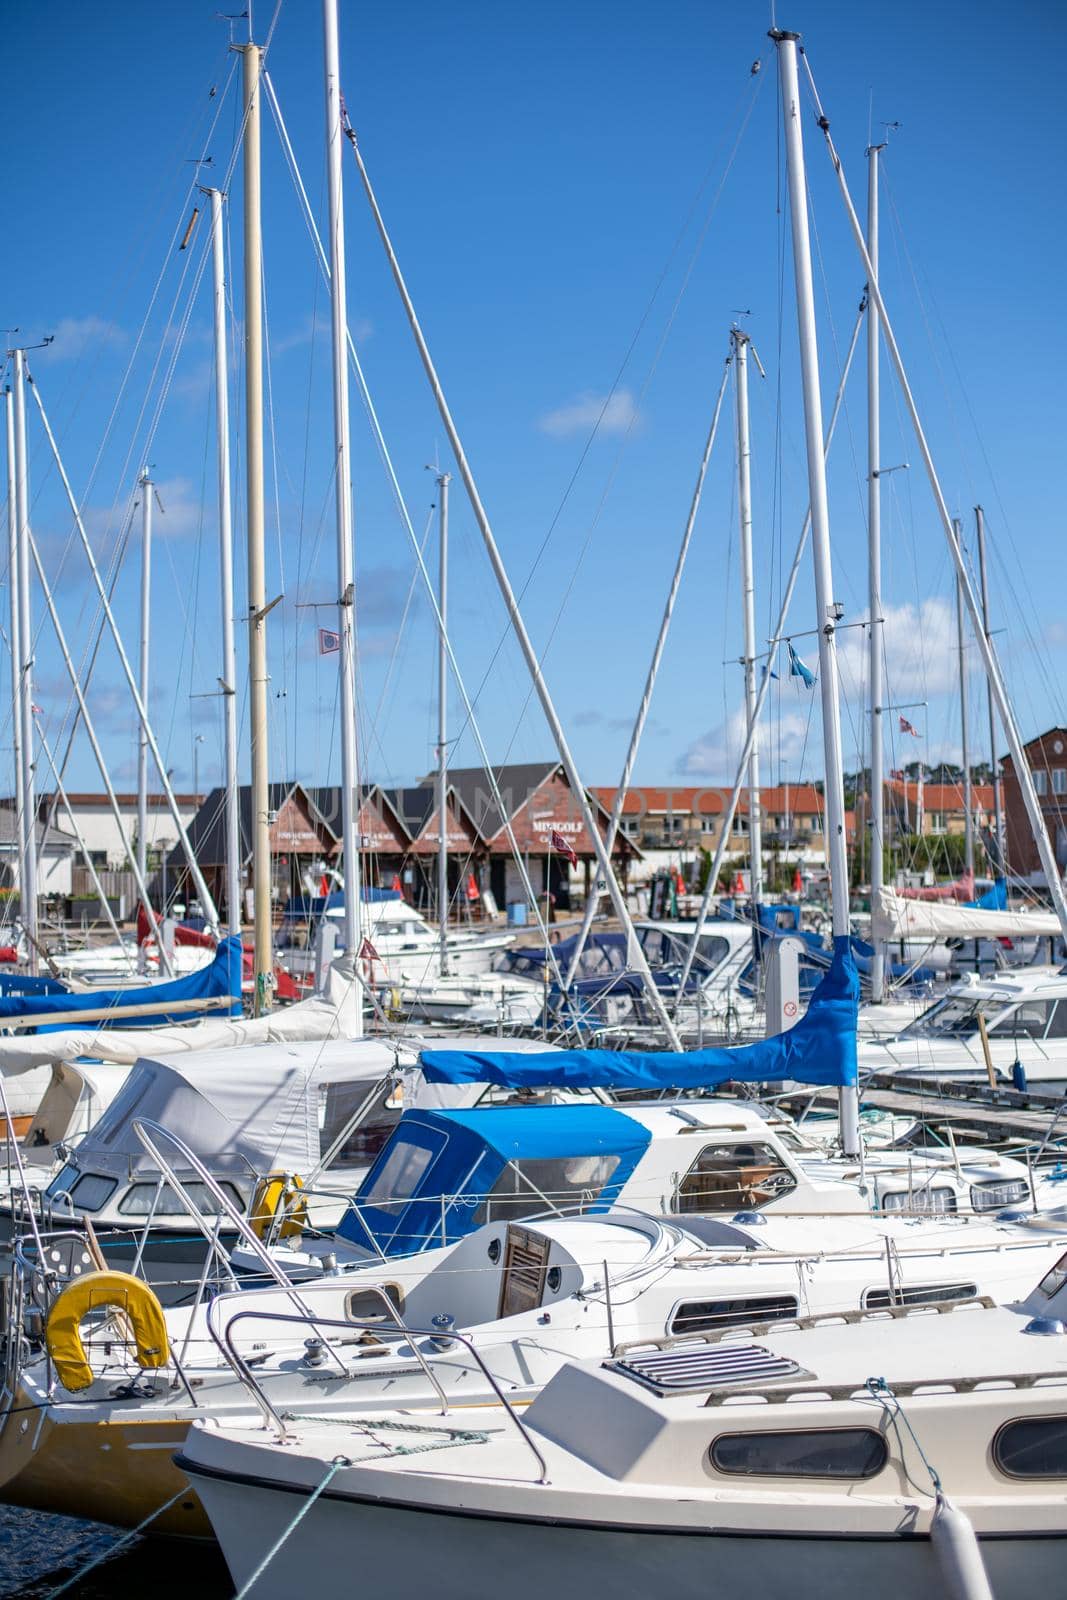 Hundested, Denmark - July 09, 2020: Sailboats anchored at the small local harbour.